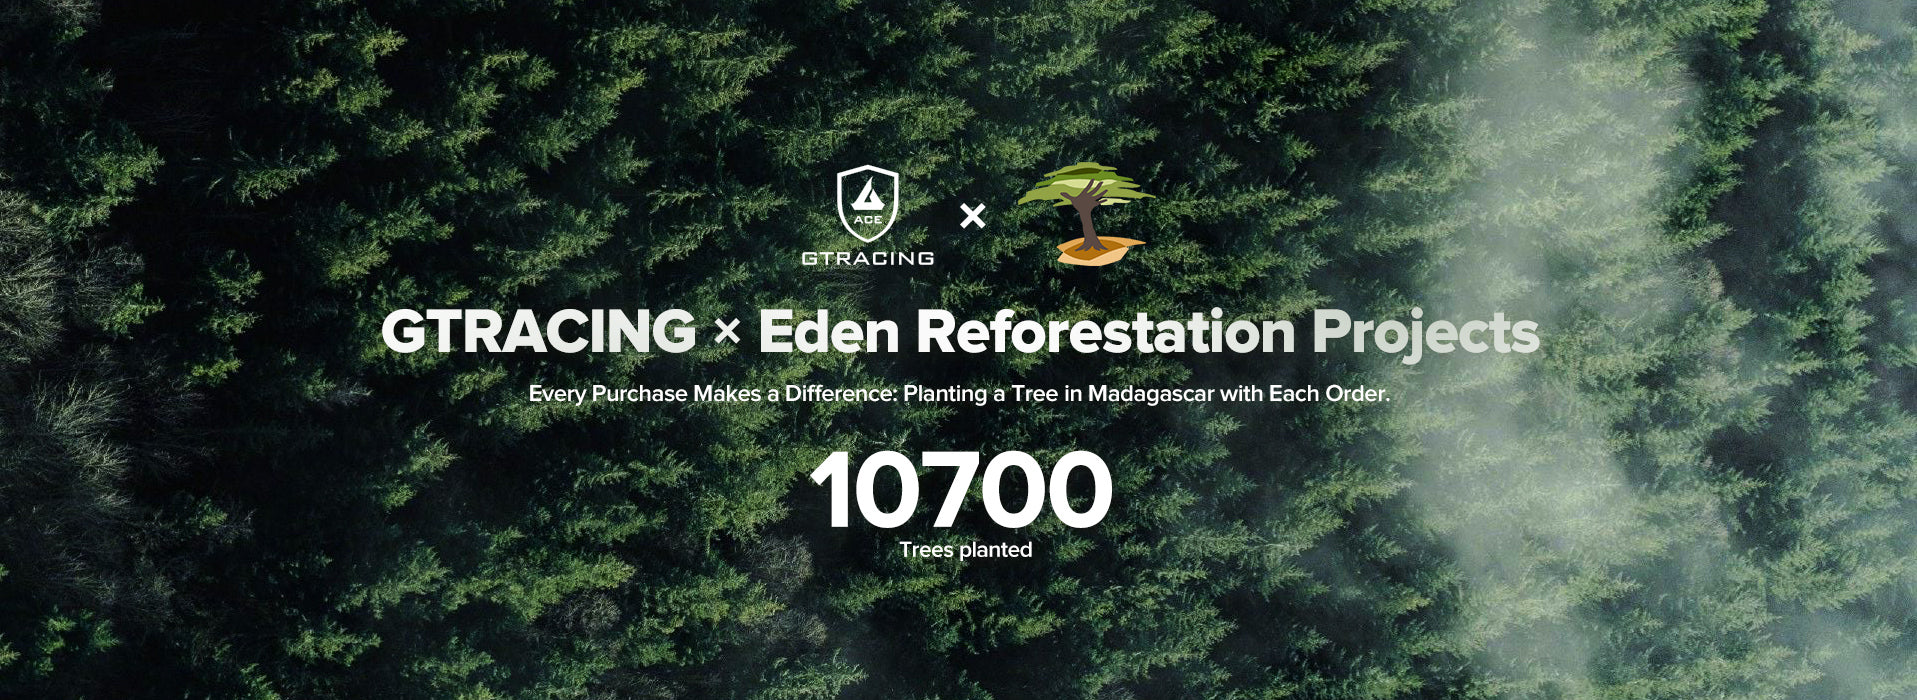 GTRACING*Eden Reforestation Projects